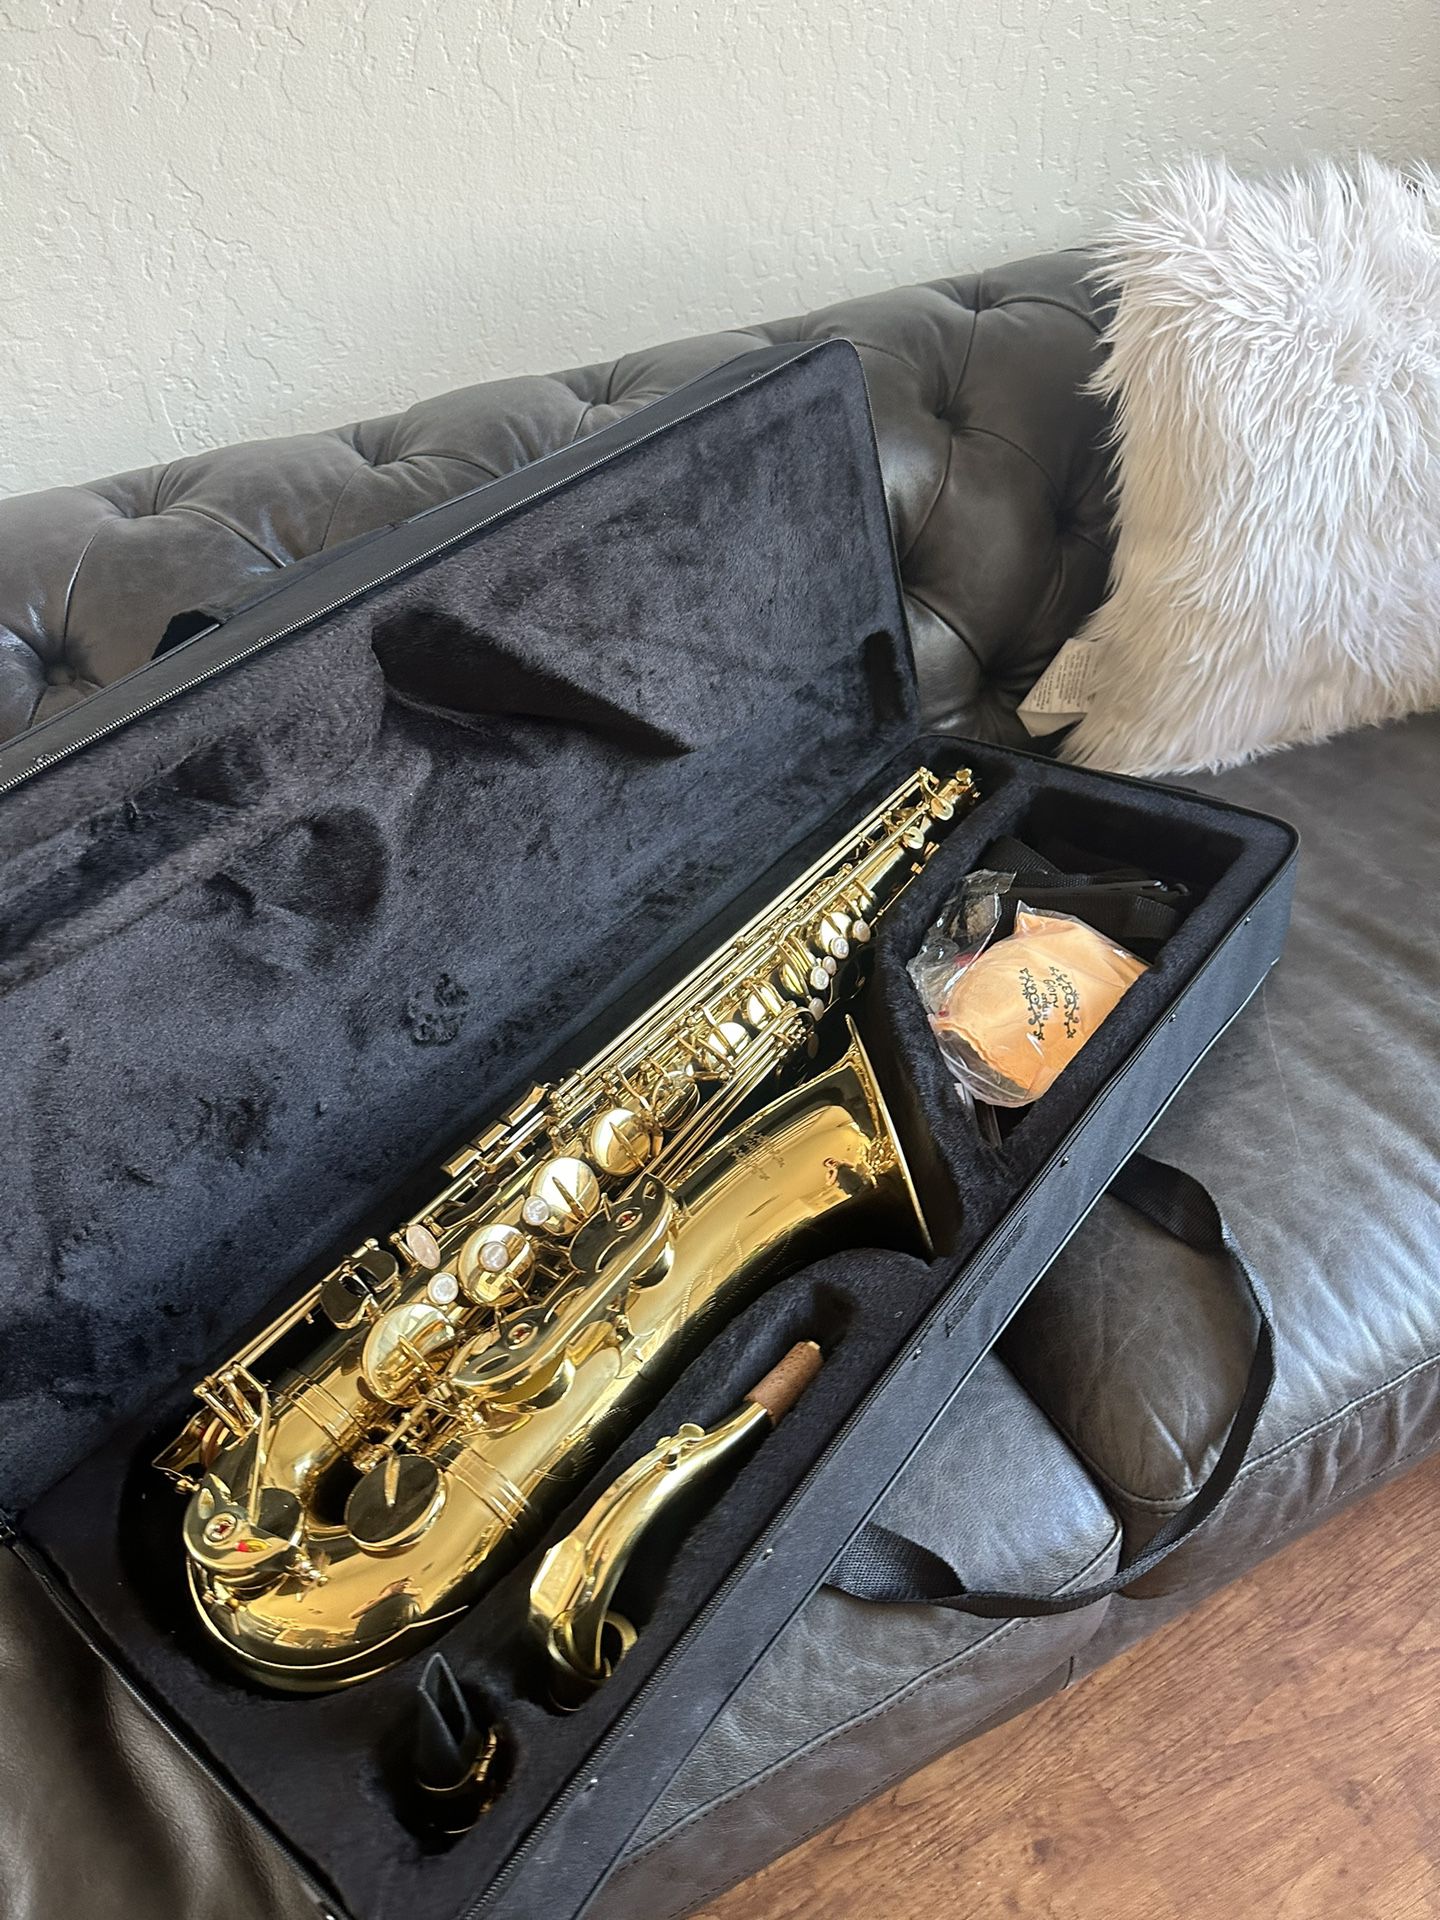 Brand New Tenor Saxophone/ Tenor Sax With Case And Accessories 